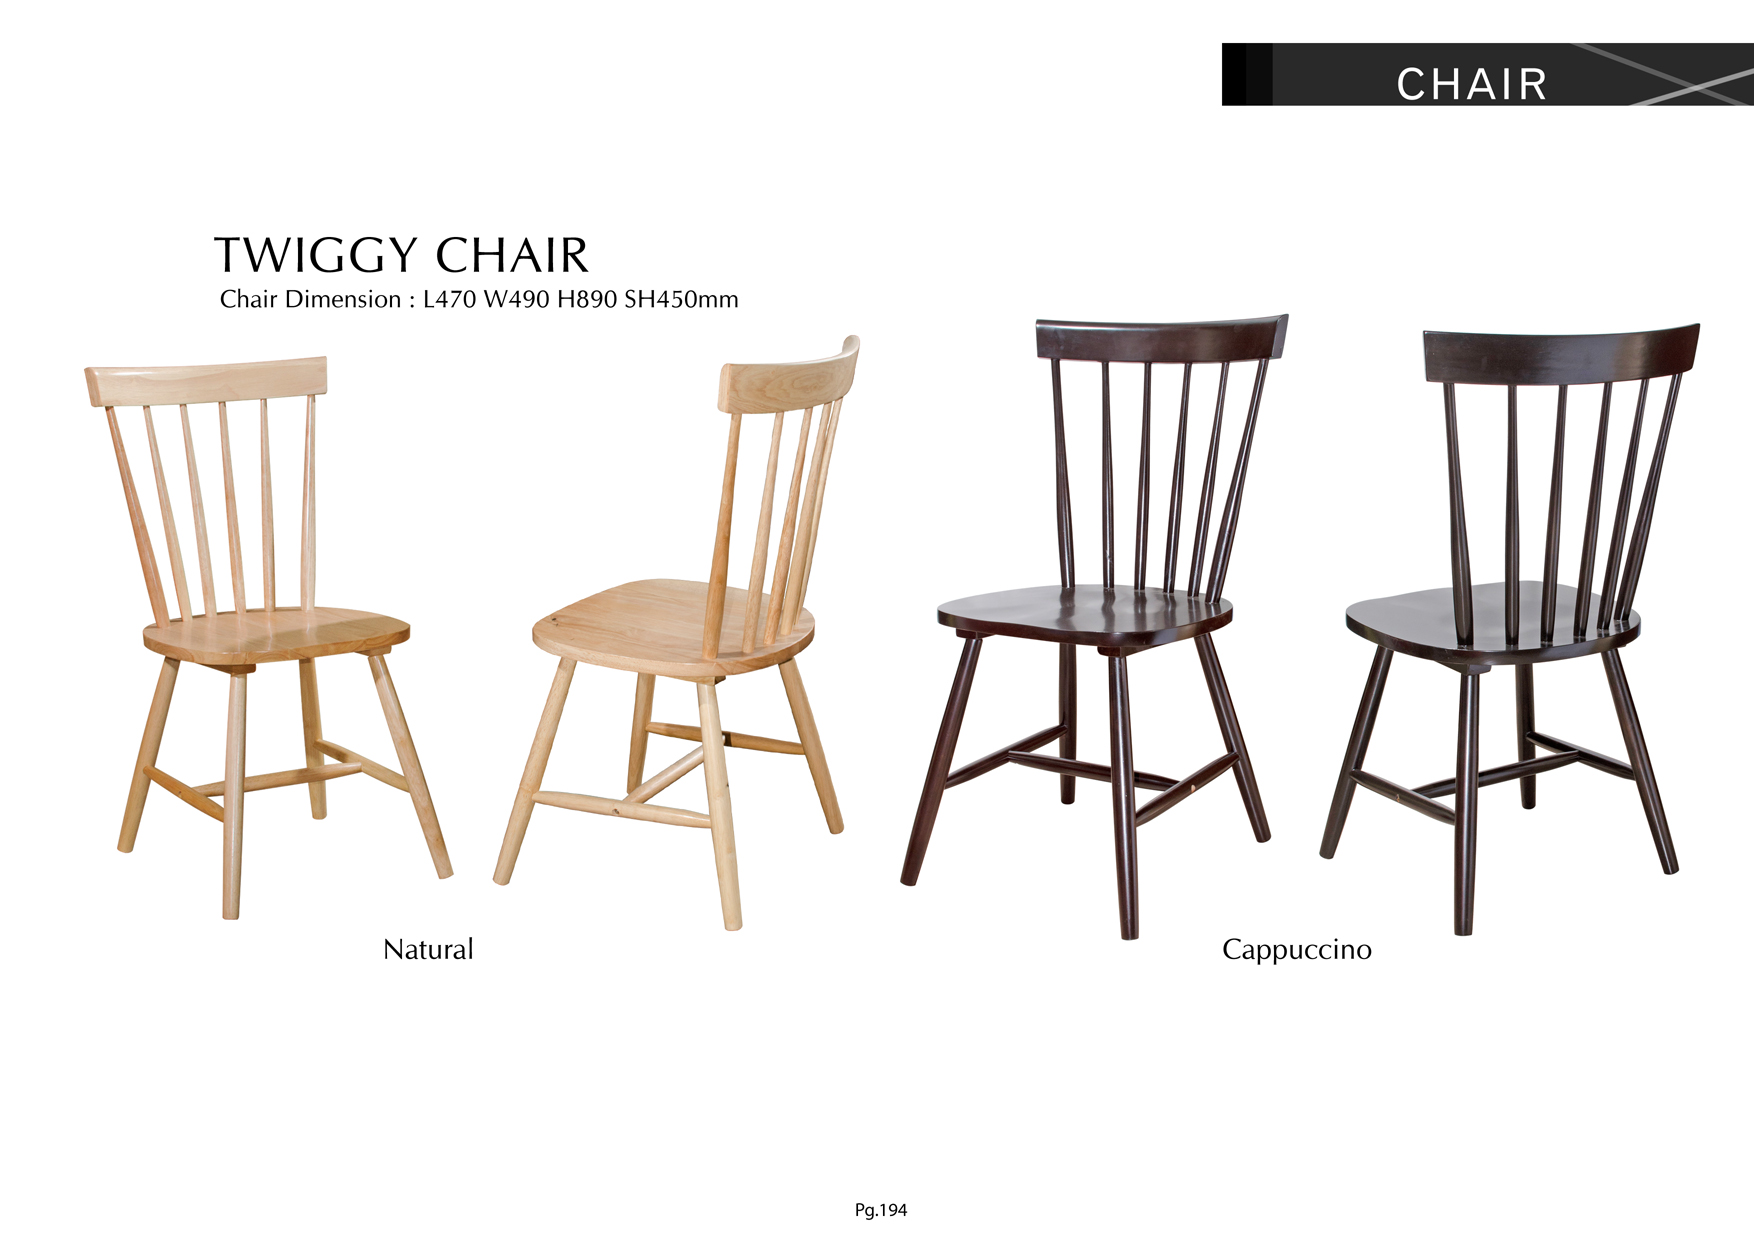 Product: PG194. TWIGGY CHAIR